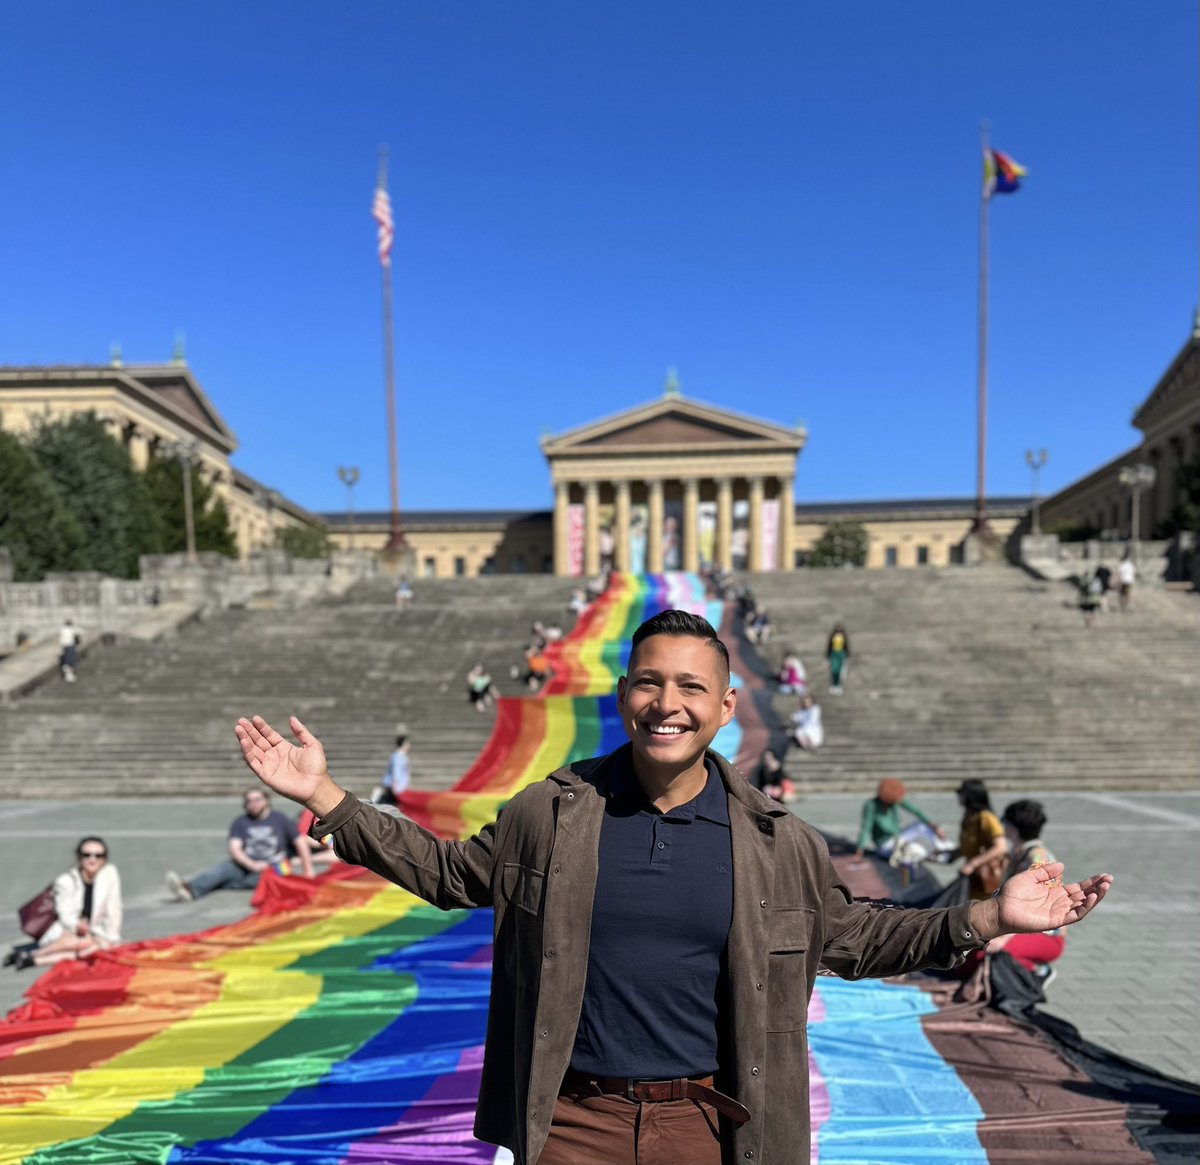 ITS PRIDE MONTH IN PHILLY. We’re catching you up on all the excitement this weekend plus a look at the largest Pride flag in the USA coming up at 6 on @NBCPhiladelphia